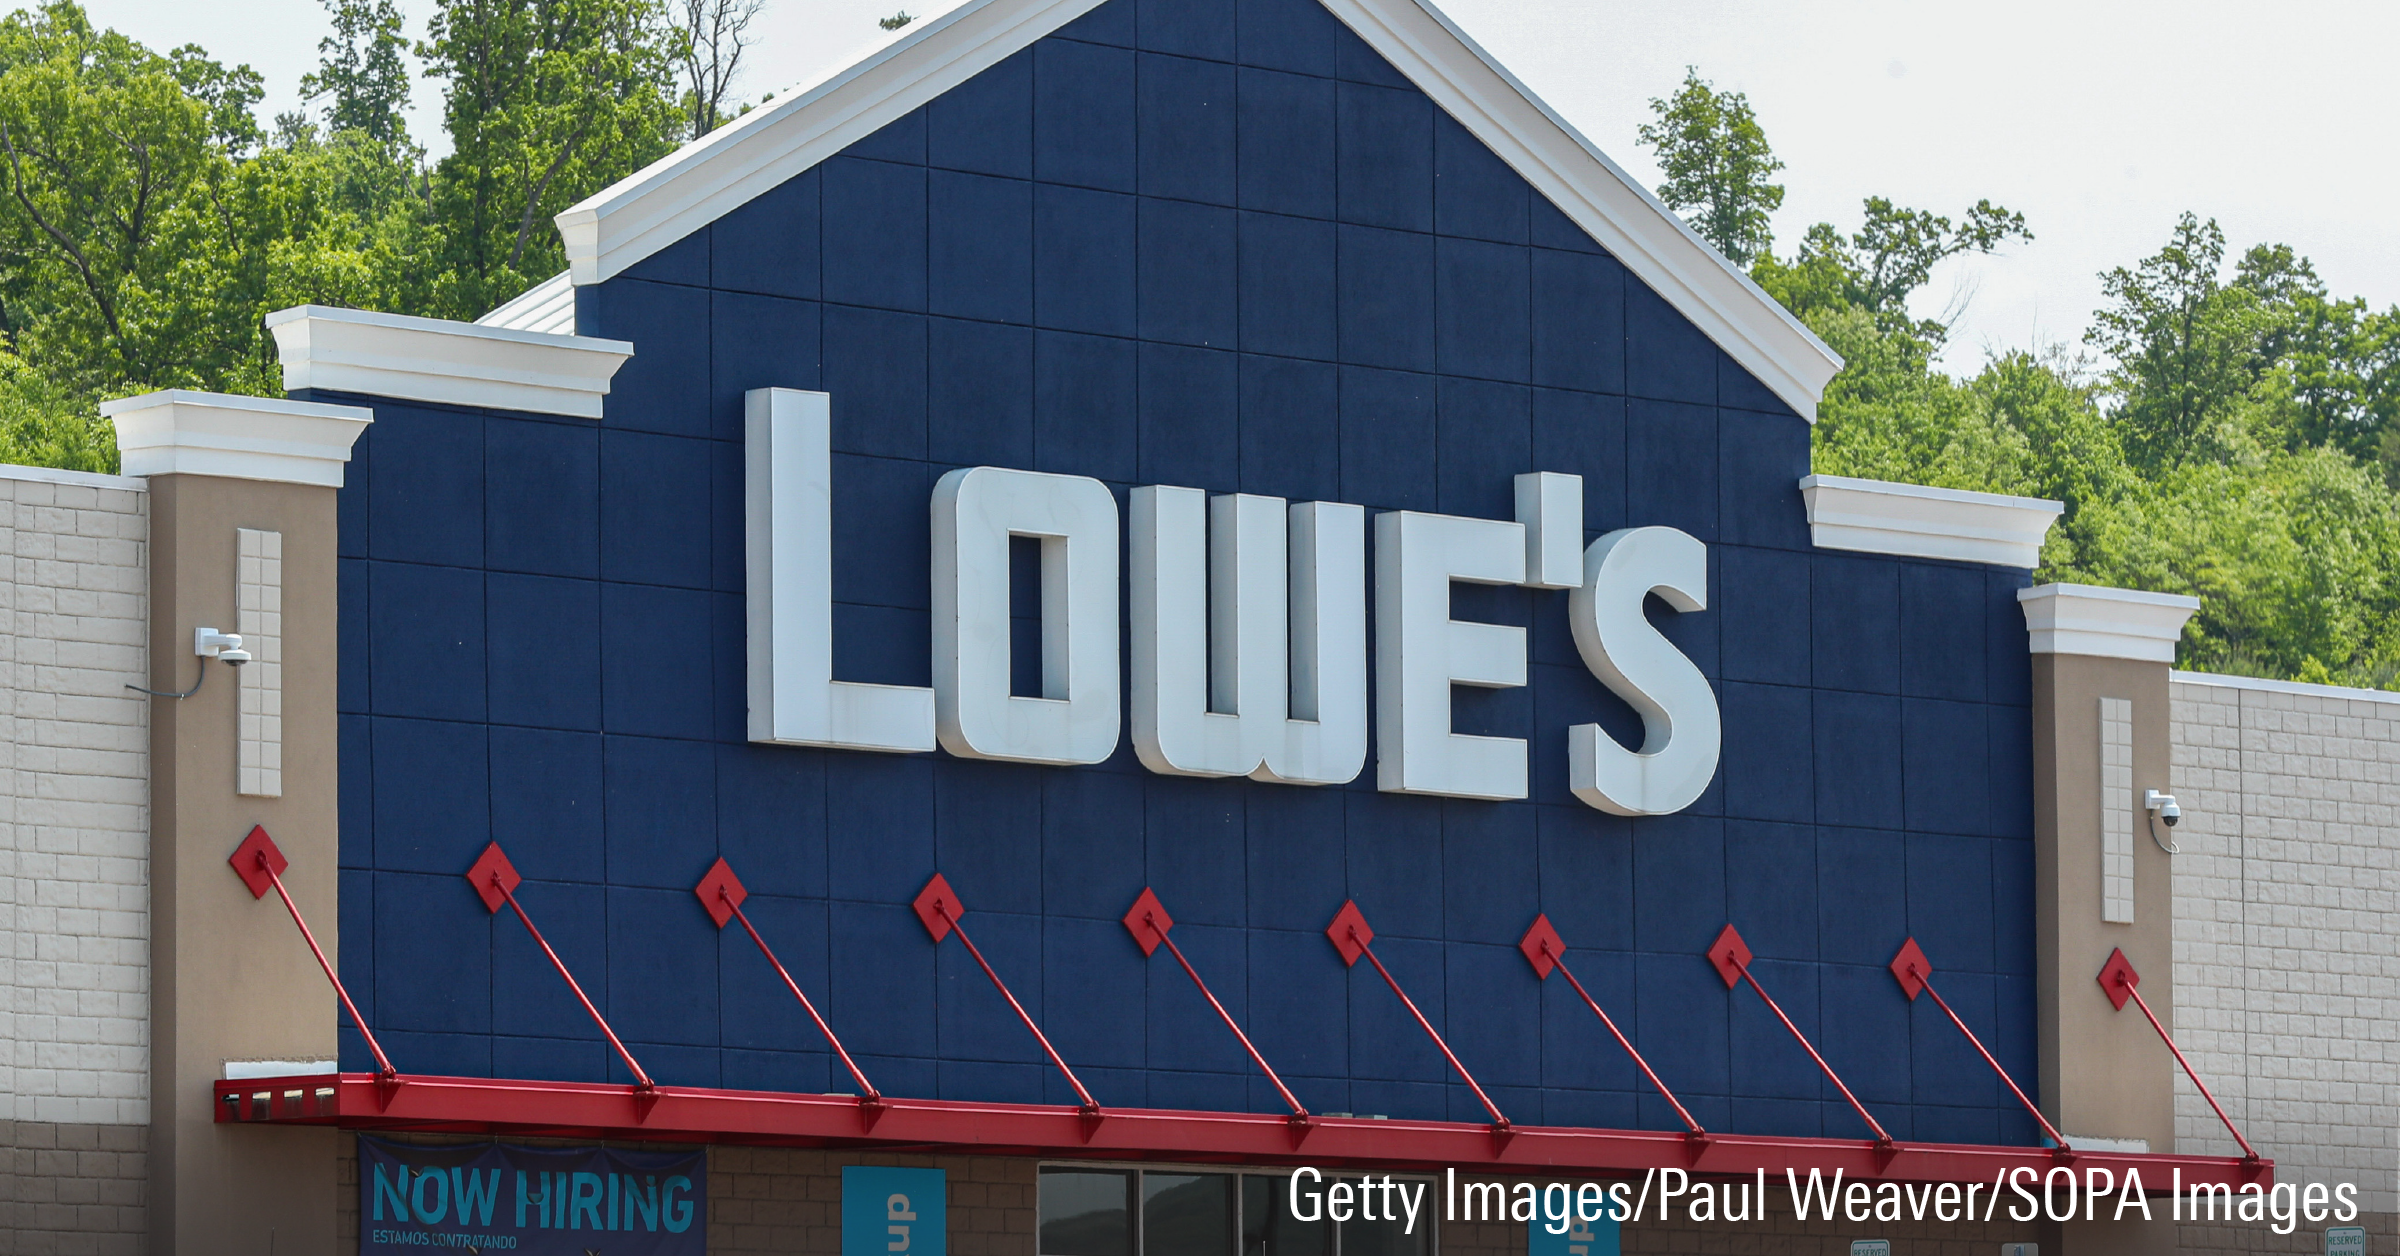 An exterior view of a Lowe's home improvement store.